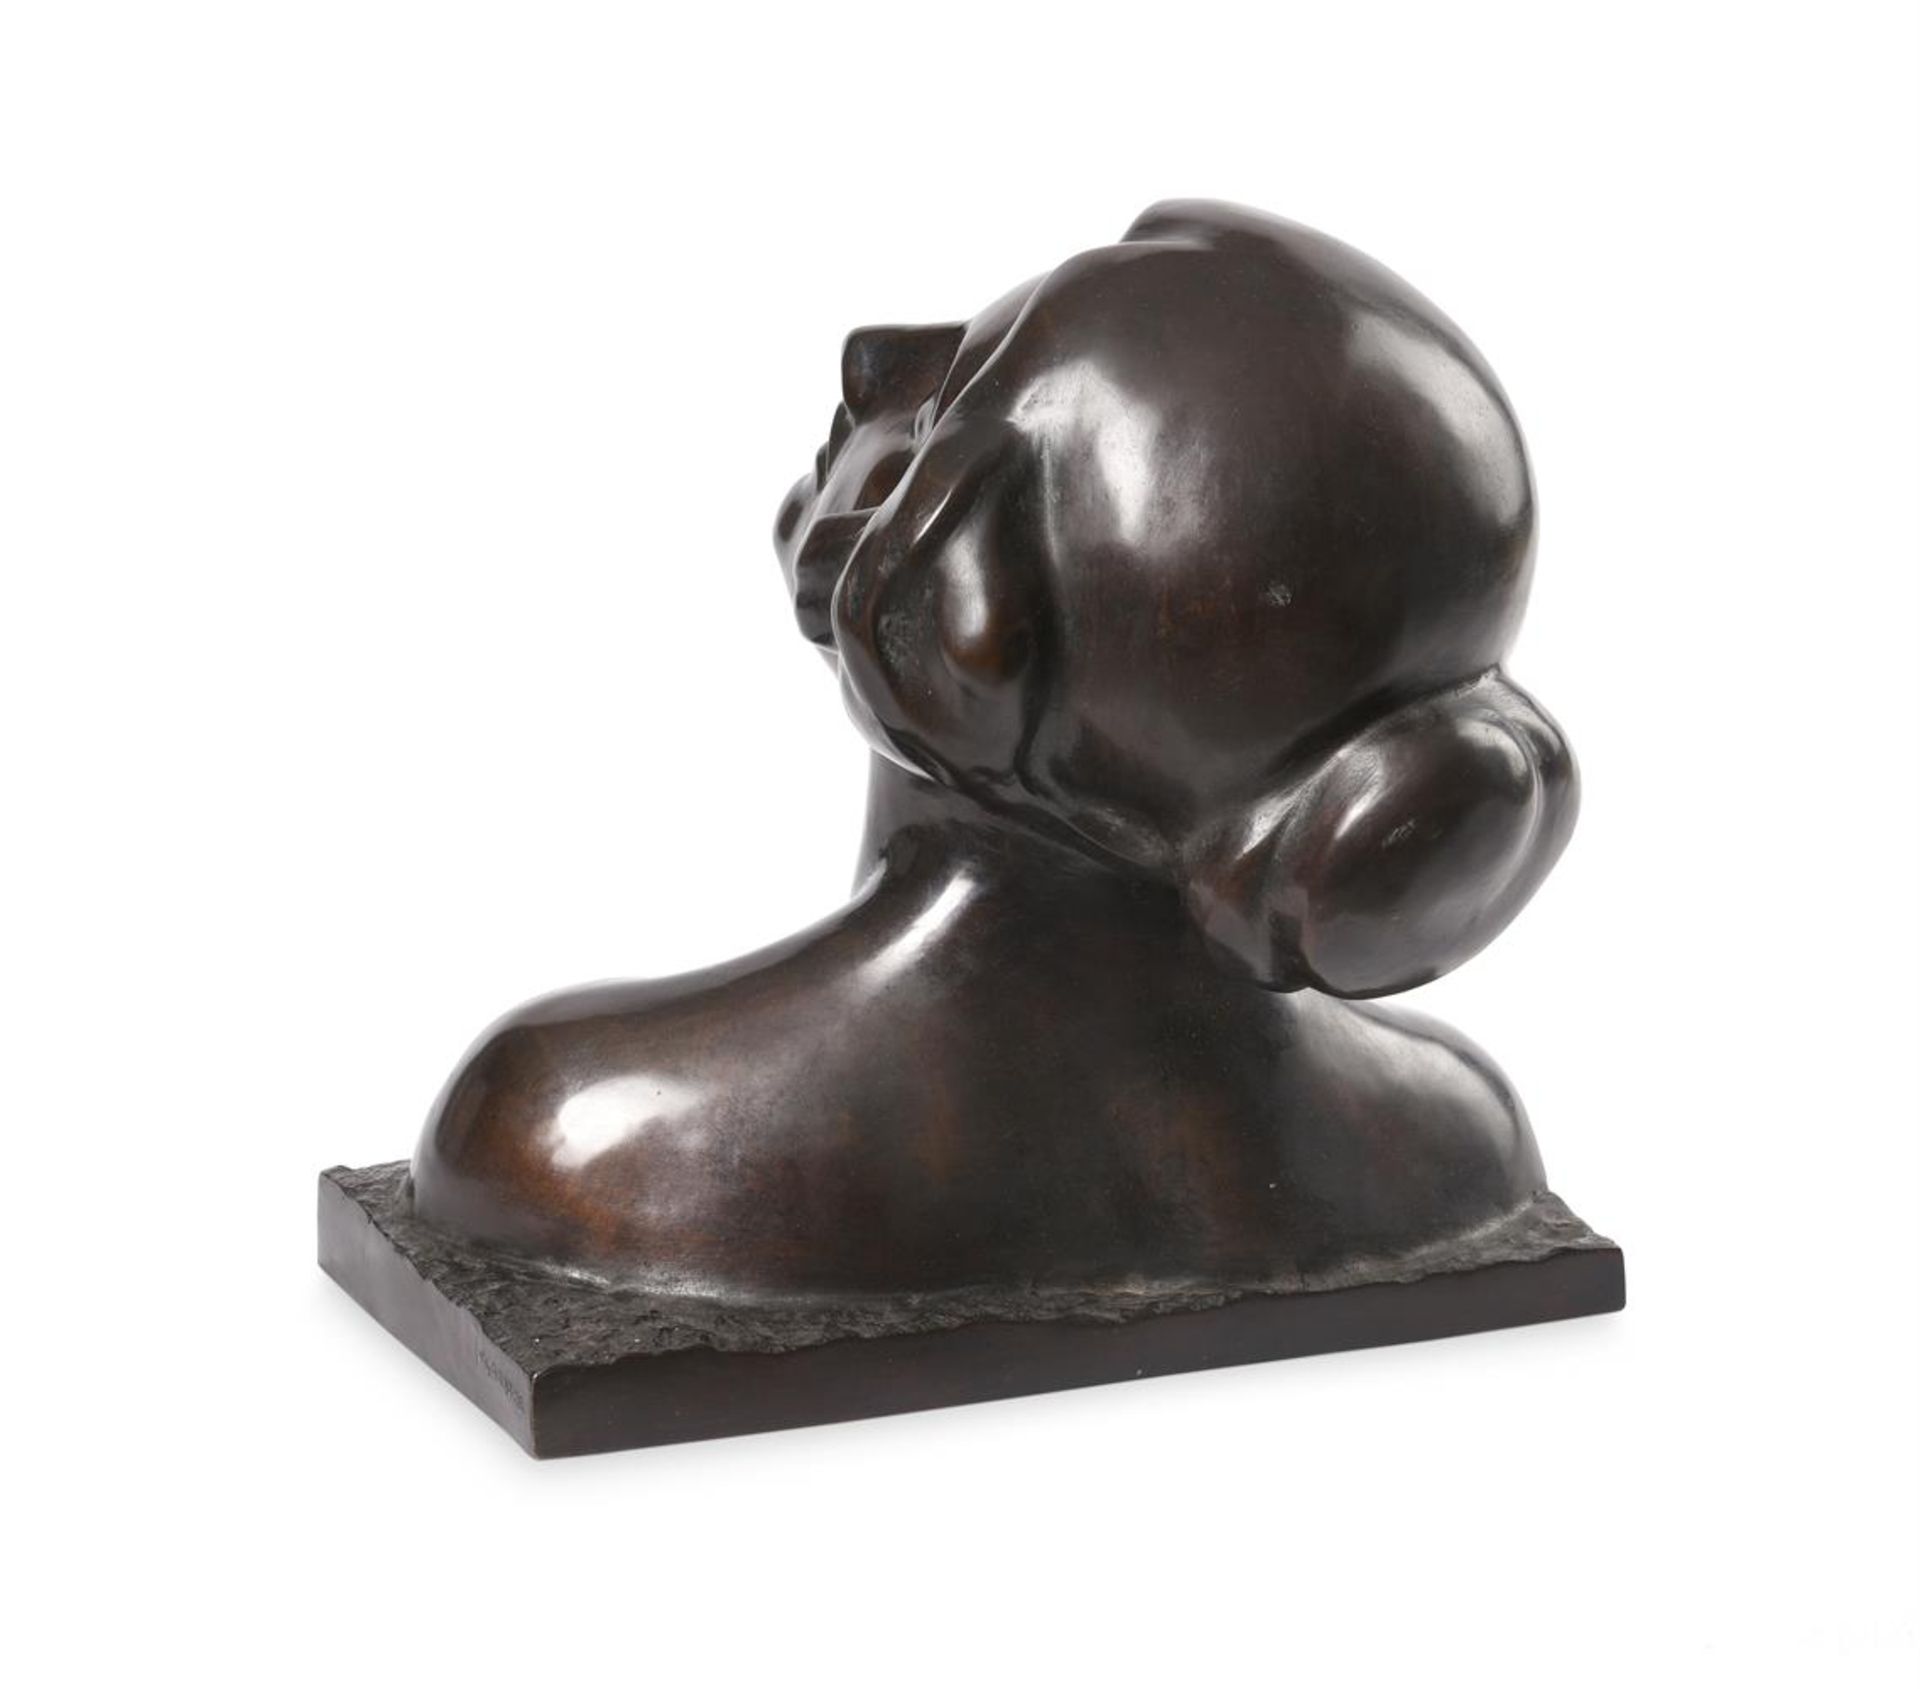 AFTER JEAN-LÉON GÉRÔME (FRENCH 1824-1904) A BRONZE BUST OF A WOMAN, LATE 19TH OR EARLY 20TH CENTURY - Image 3 of 3